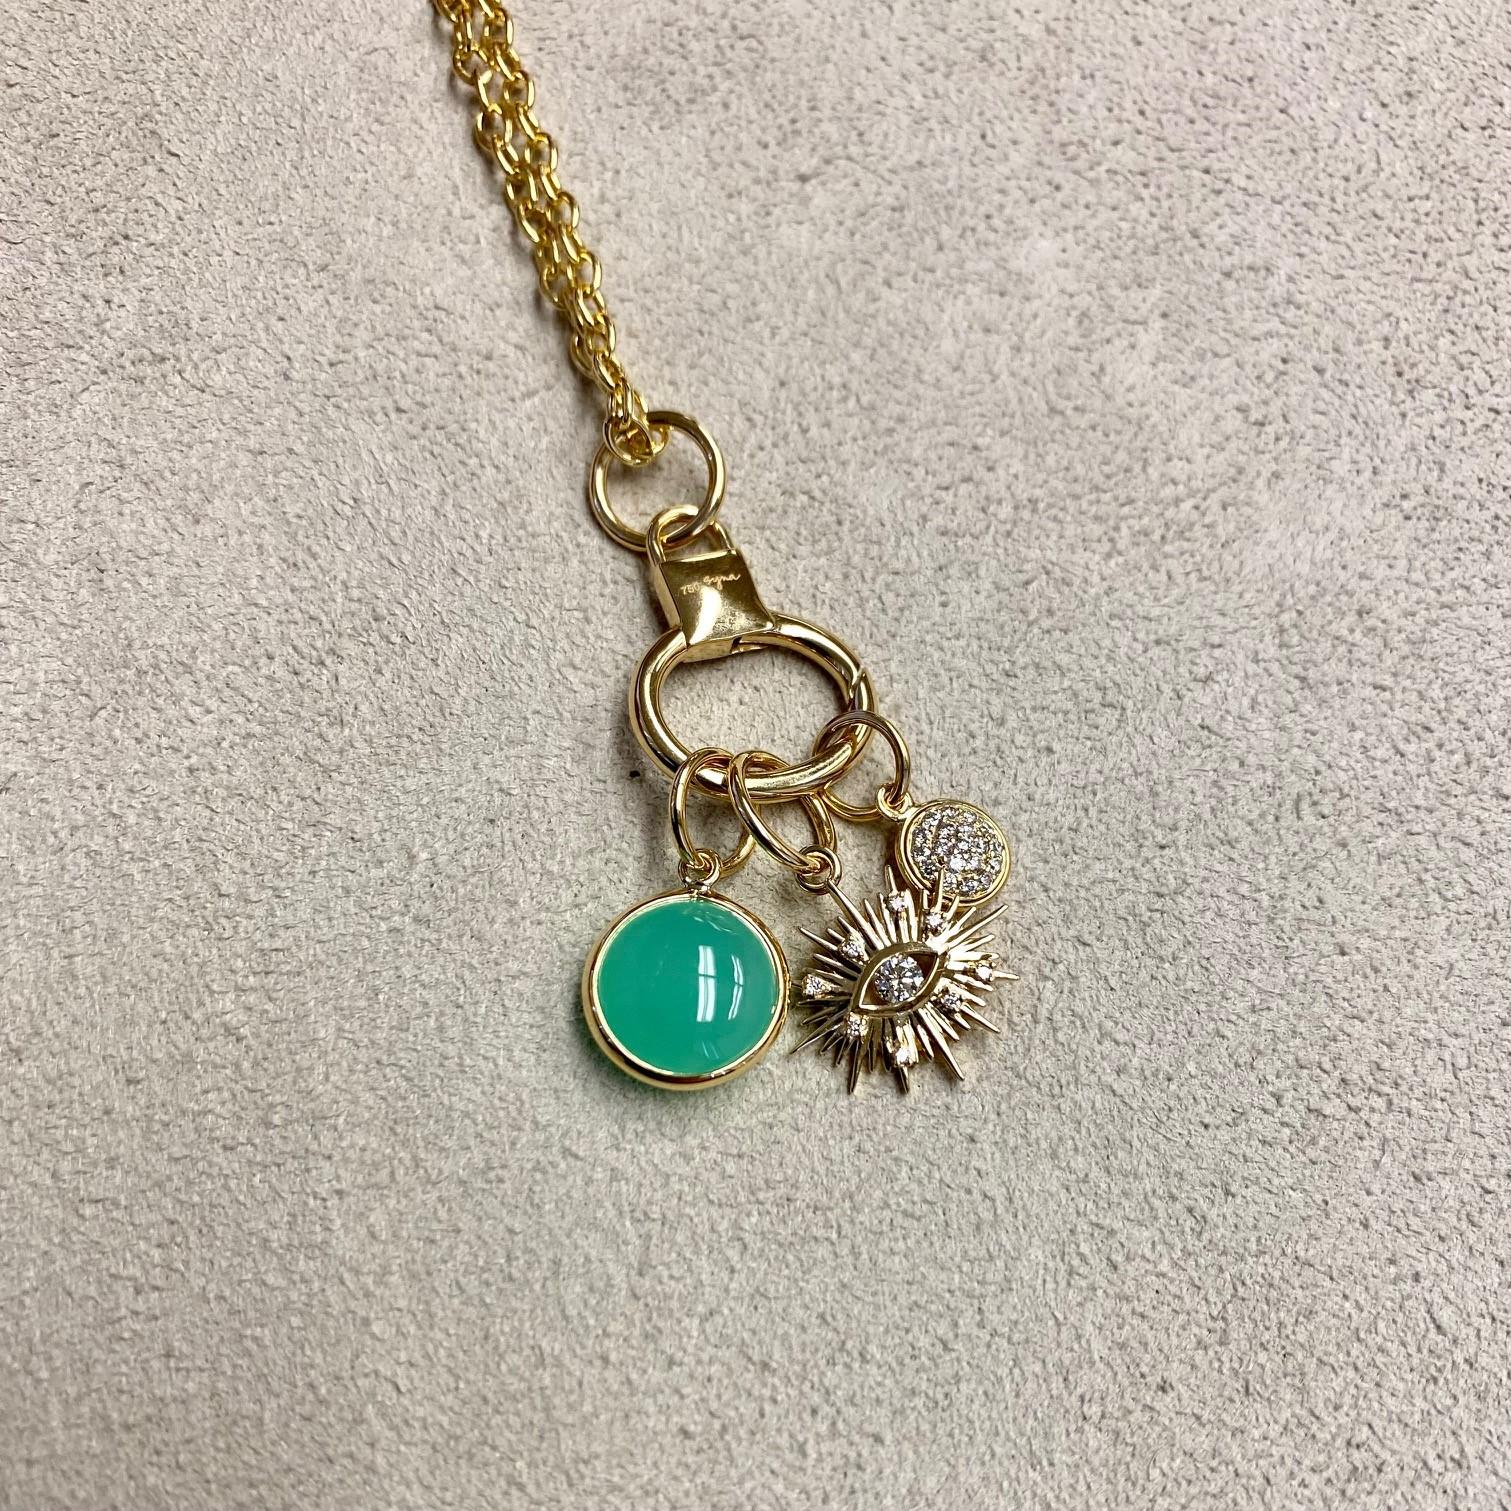 Created in 18 karat yellow gold
Chrysoprase 3.50 carats approx.
Diamonds 0.20 carat approx.
Limited edition
Chain sold separately

Handcrafted from 18 karat gold, this limited-edition Three Charm boasts a Chrysoprase gem of approximately 3.50 carats